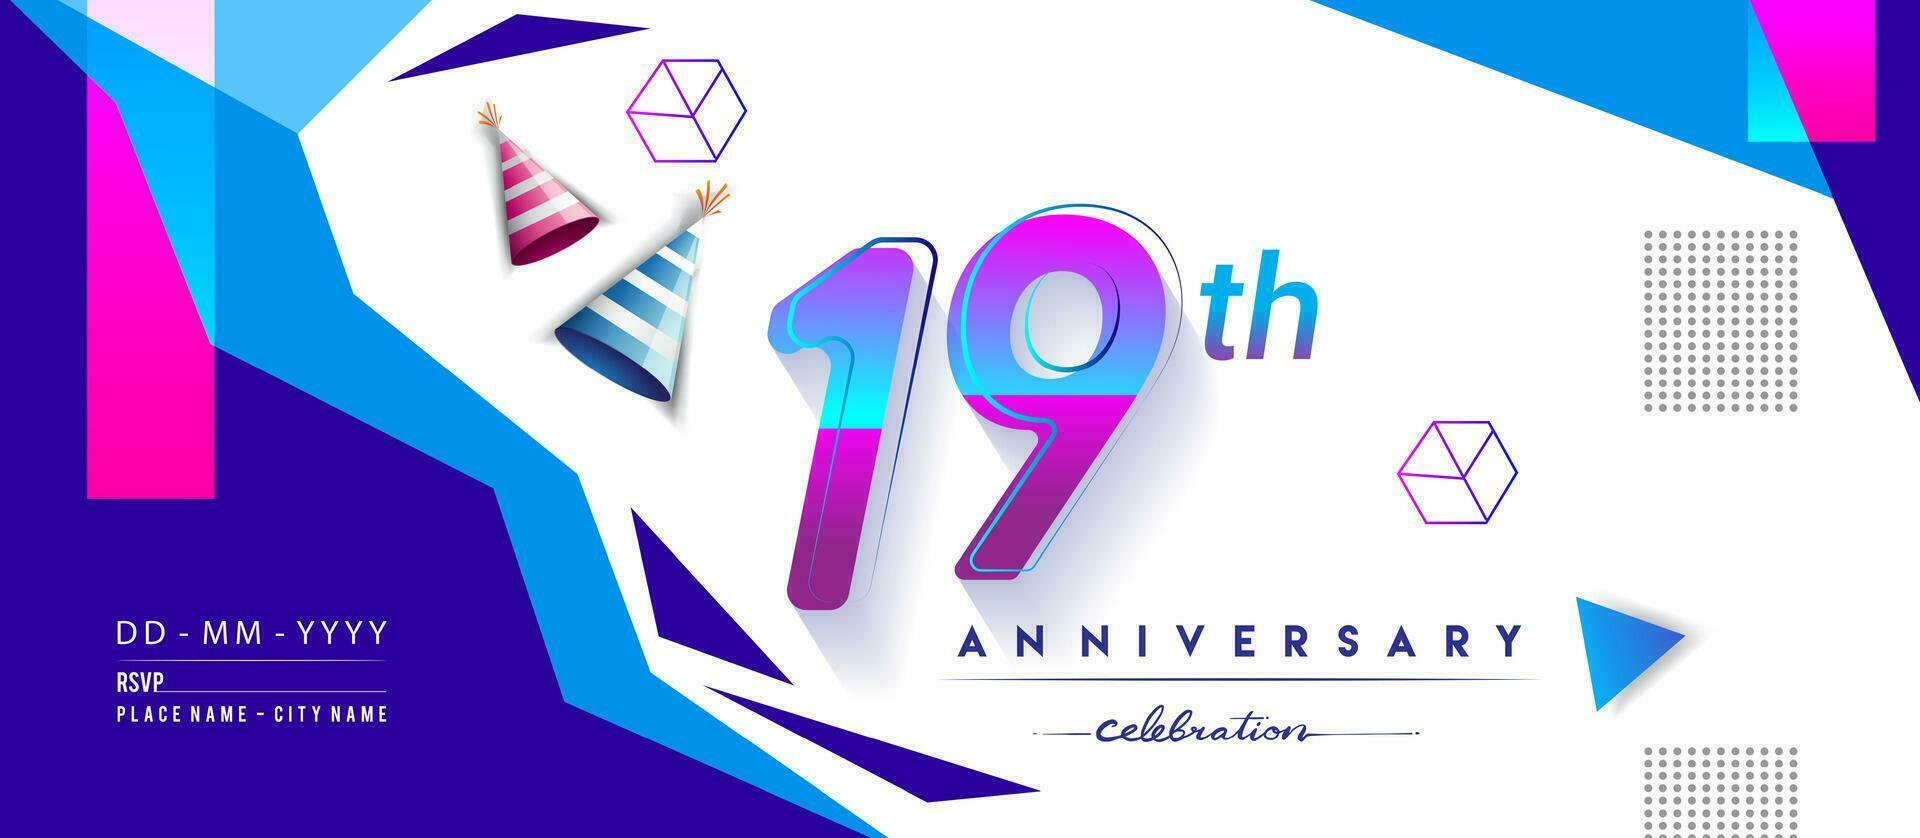 19th years anniversary logo, vector design birthday celebration with colorful geometric background and circles shape.